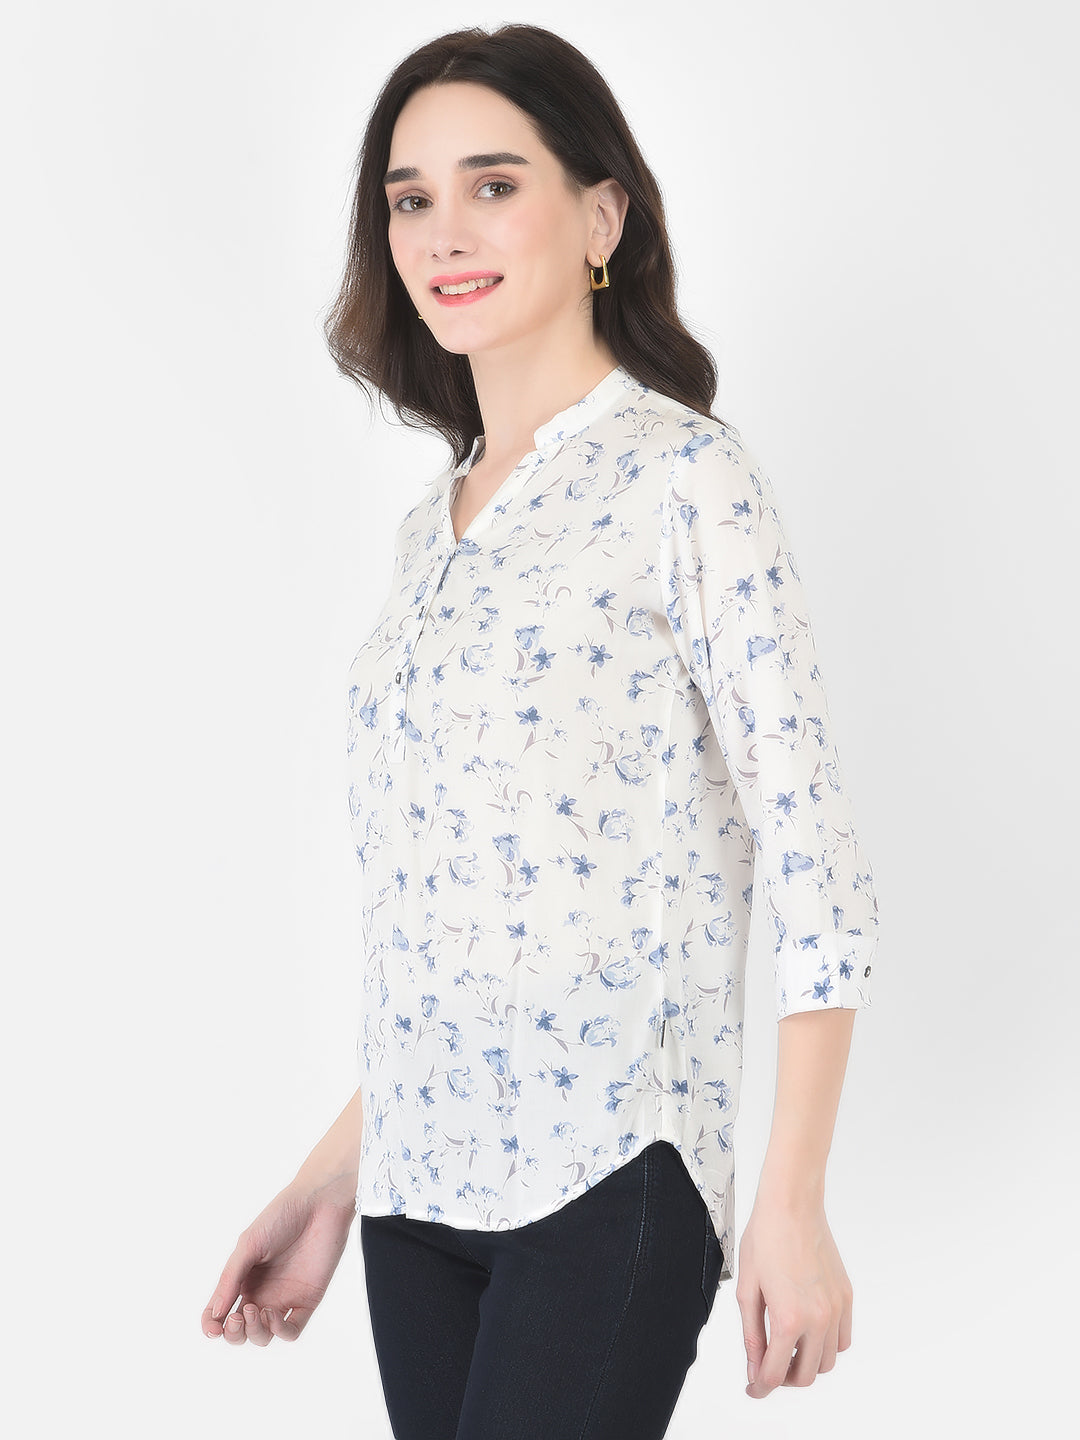 White Floral Top - Women Tops